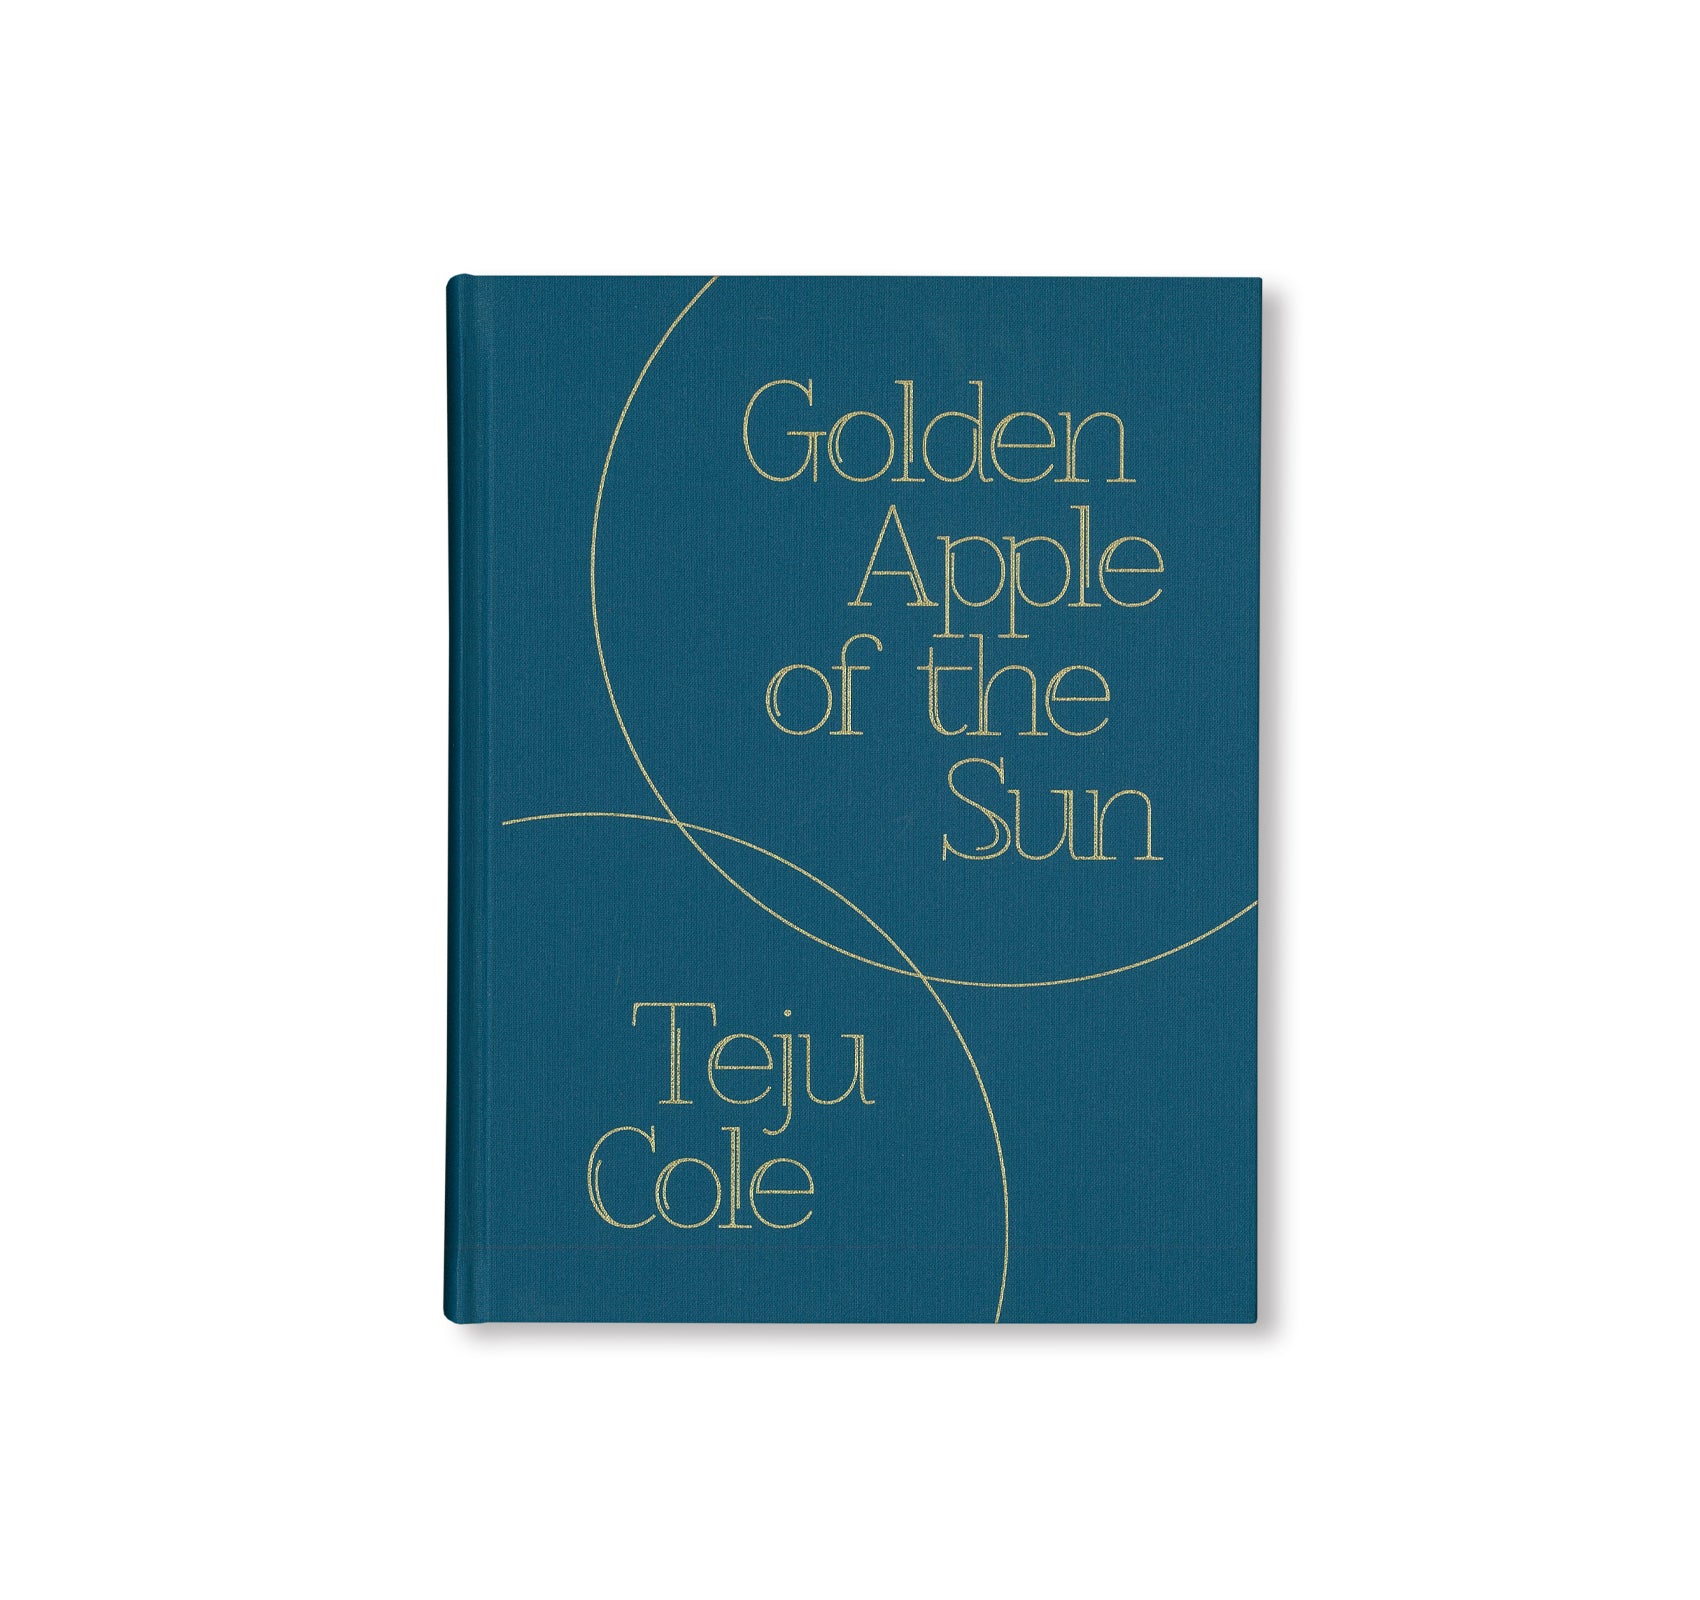 GOLDEN APPLE OF THE SUN by Teju Cole